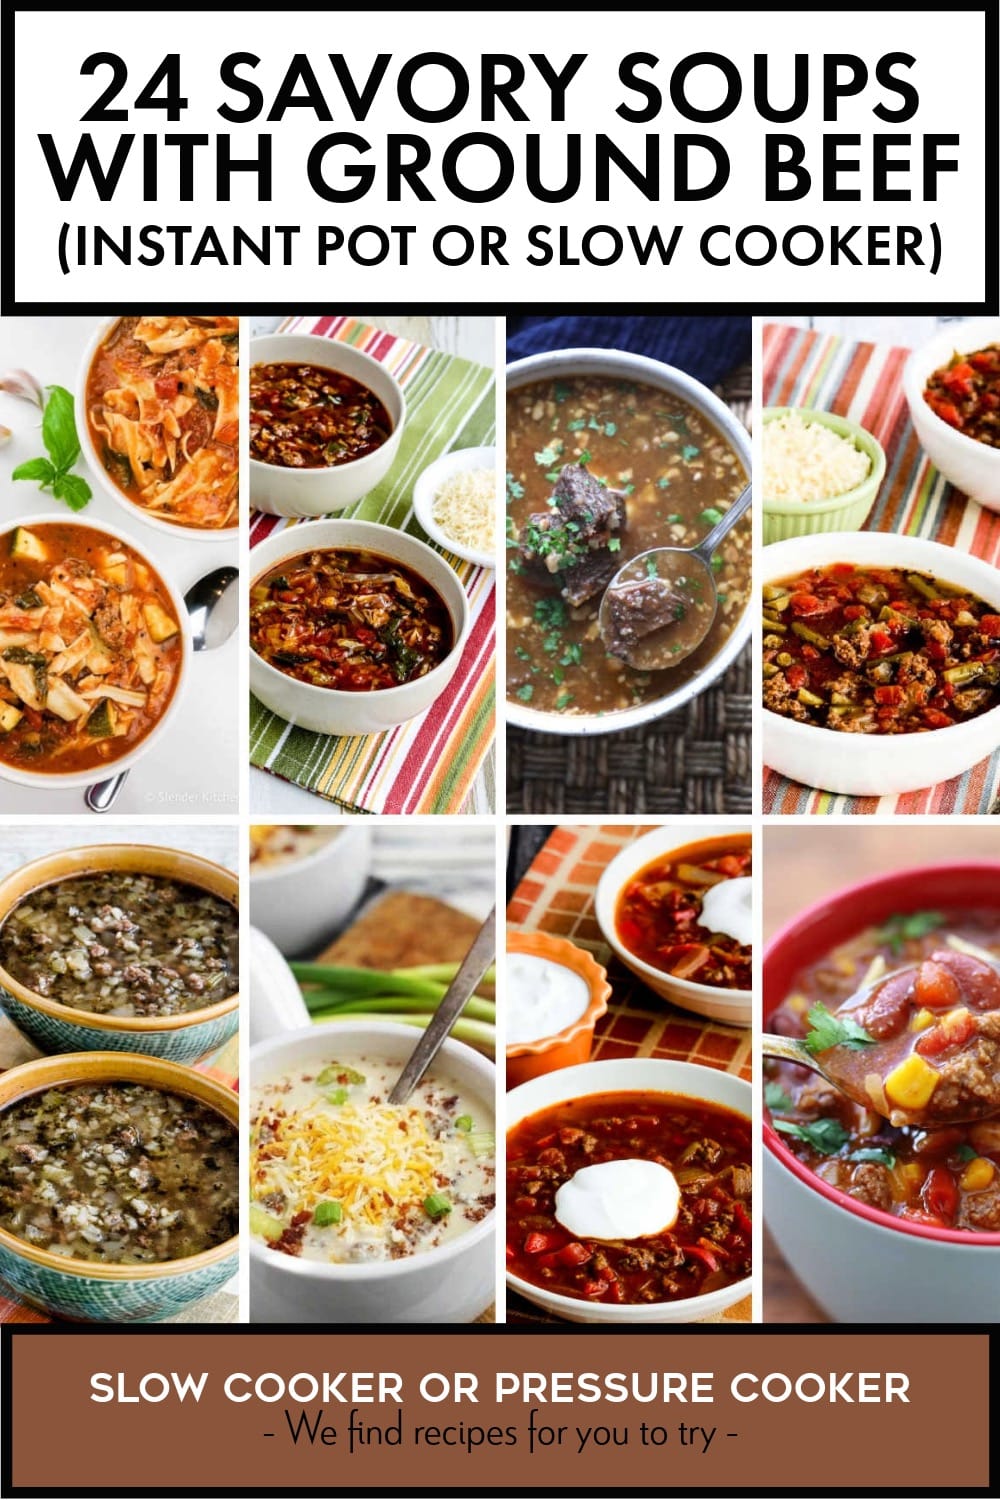 Pinterest image of 24 Savory Soups with Ground Beef (Instant Pot or Slow Cooker)